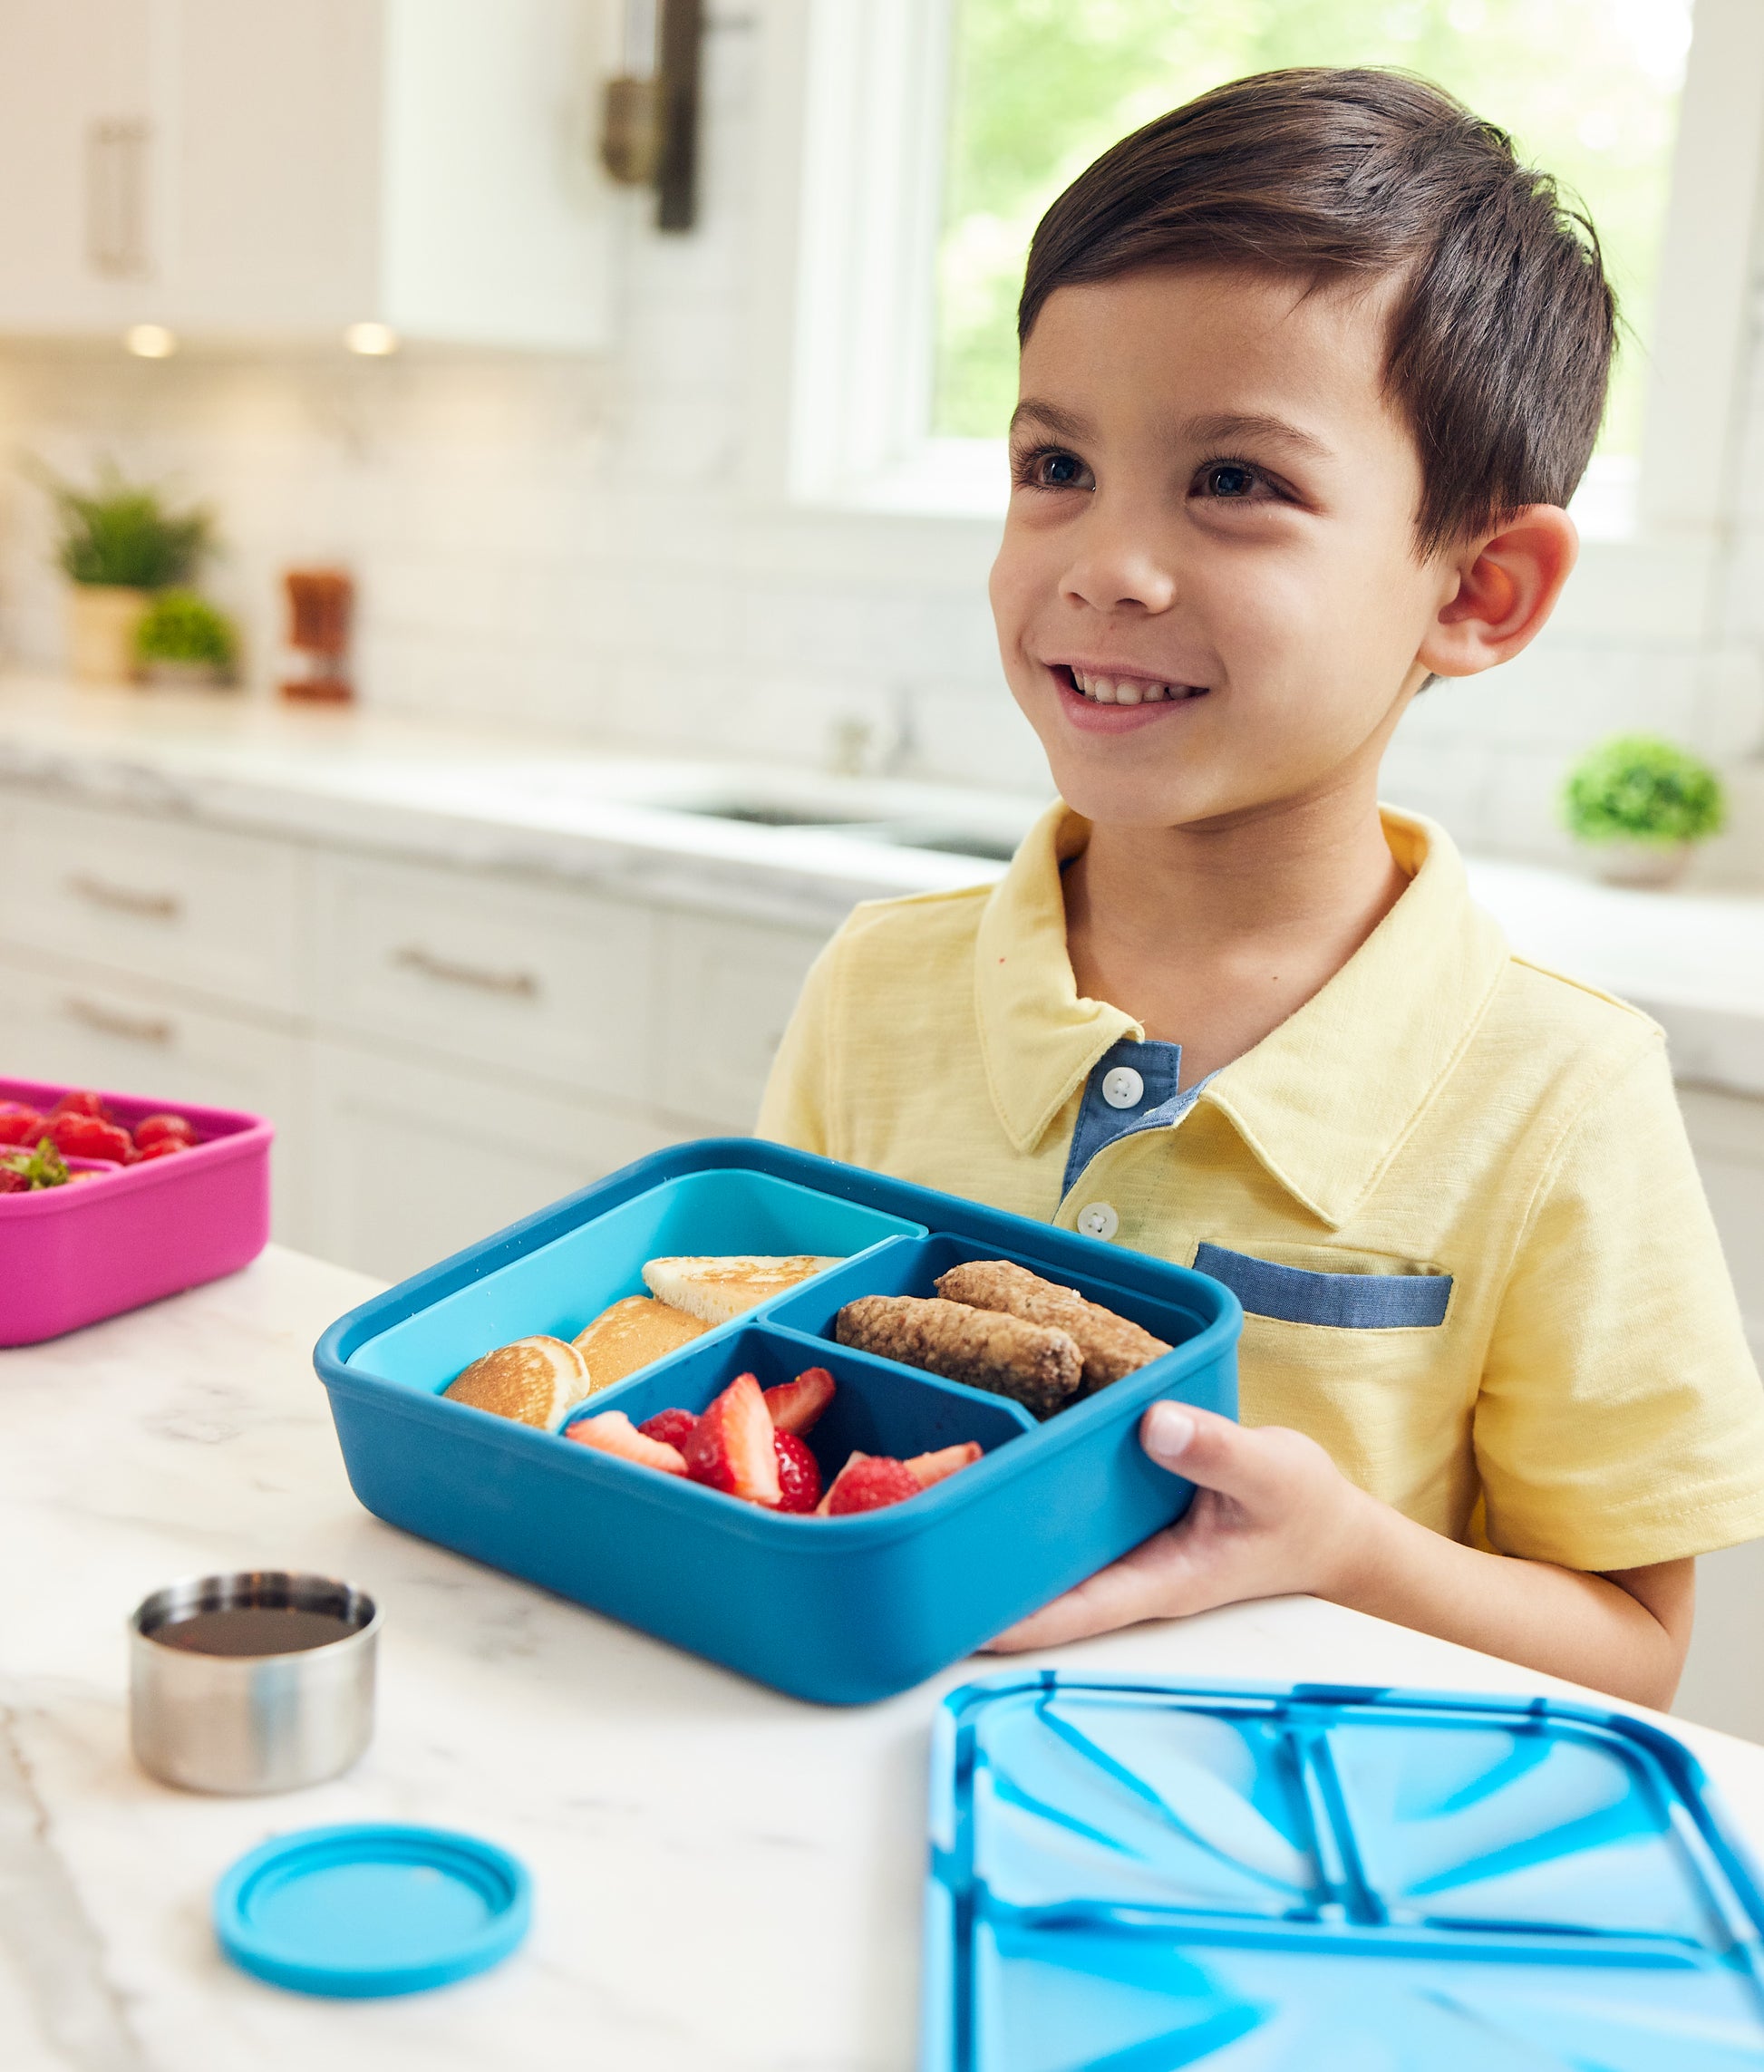 Best Lunch Box for Kids - LunchBots Review